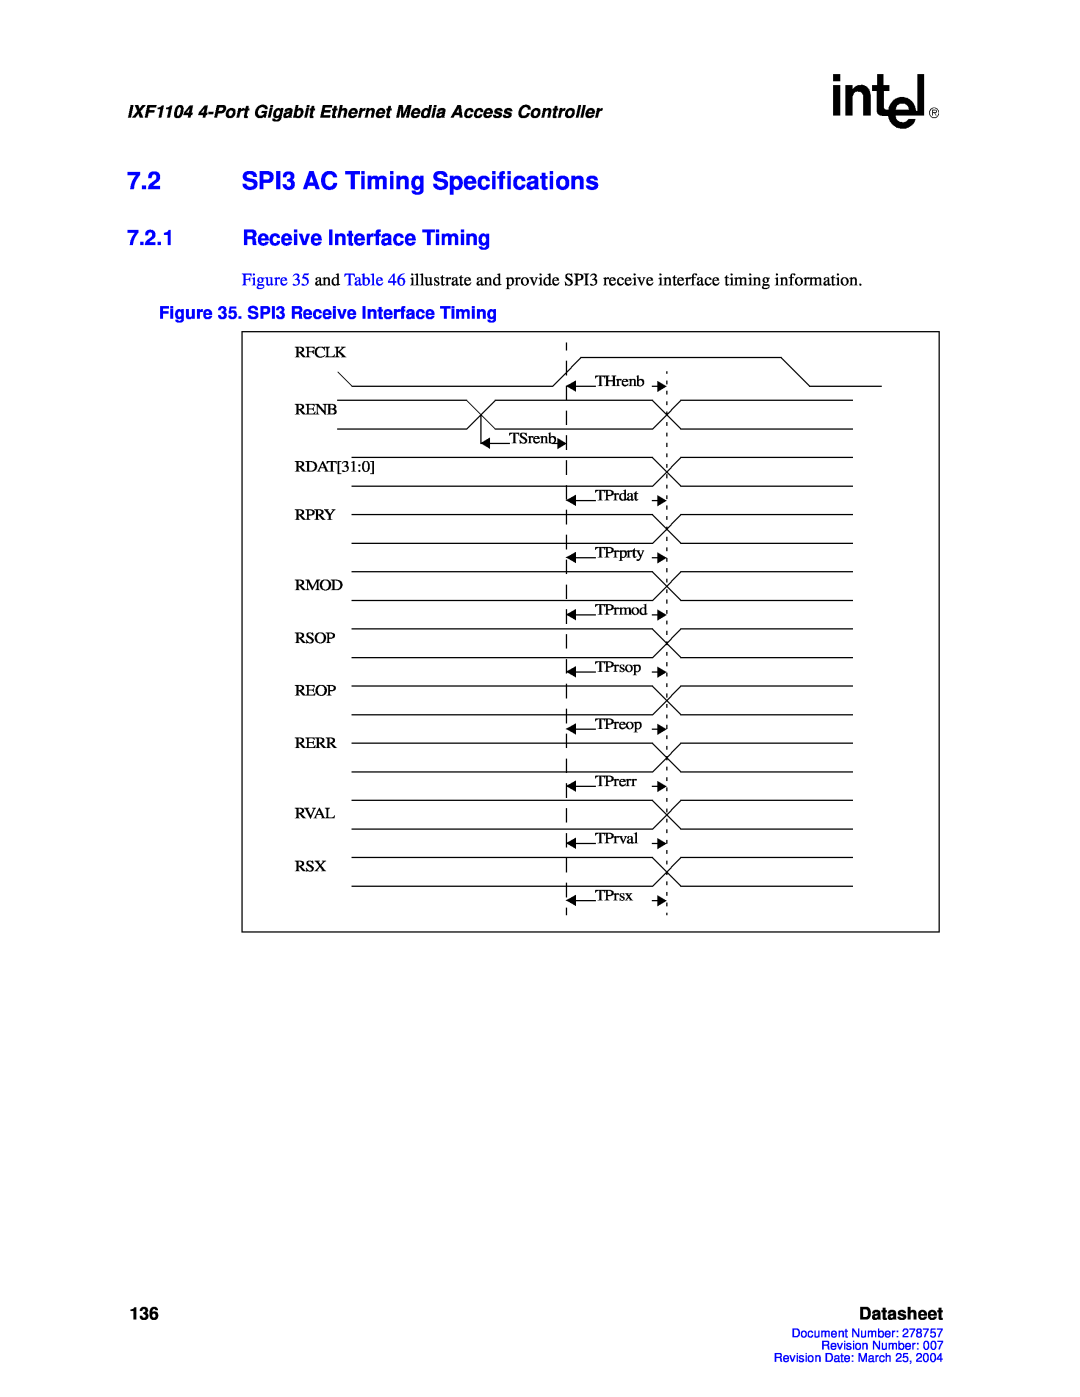 Intel IXF1104 manual 7.2SPI3 AC Timing Specifications, 7.2.1Receive Interface Timing, Datasheet 